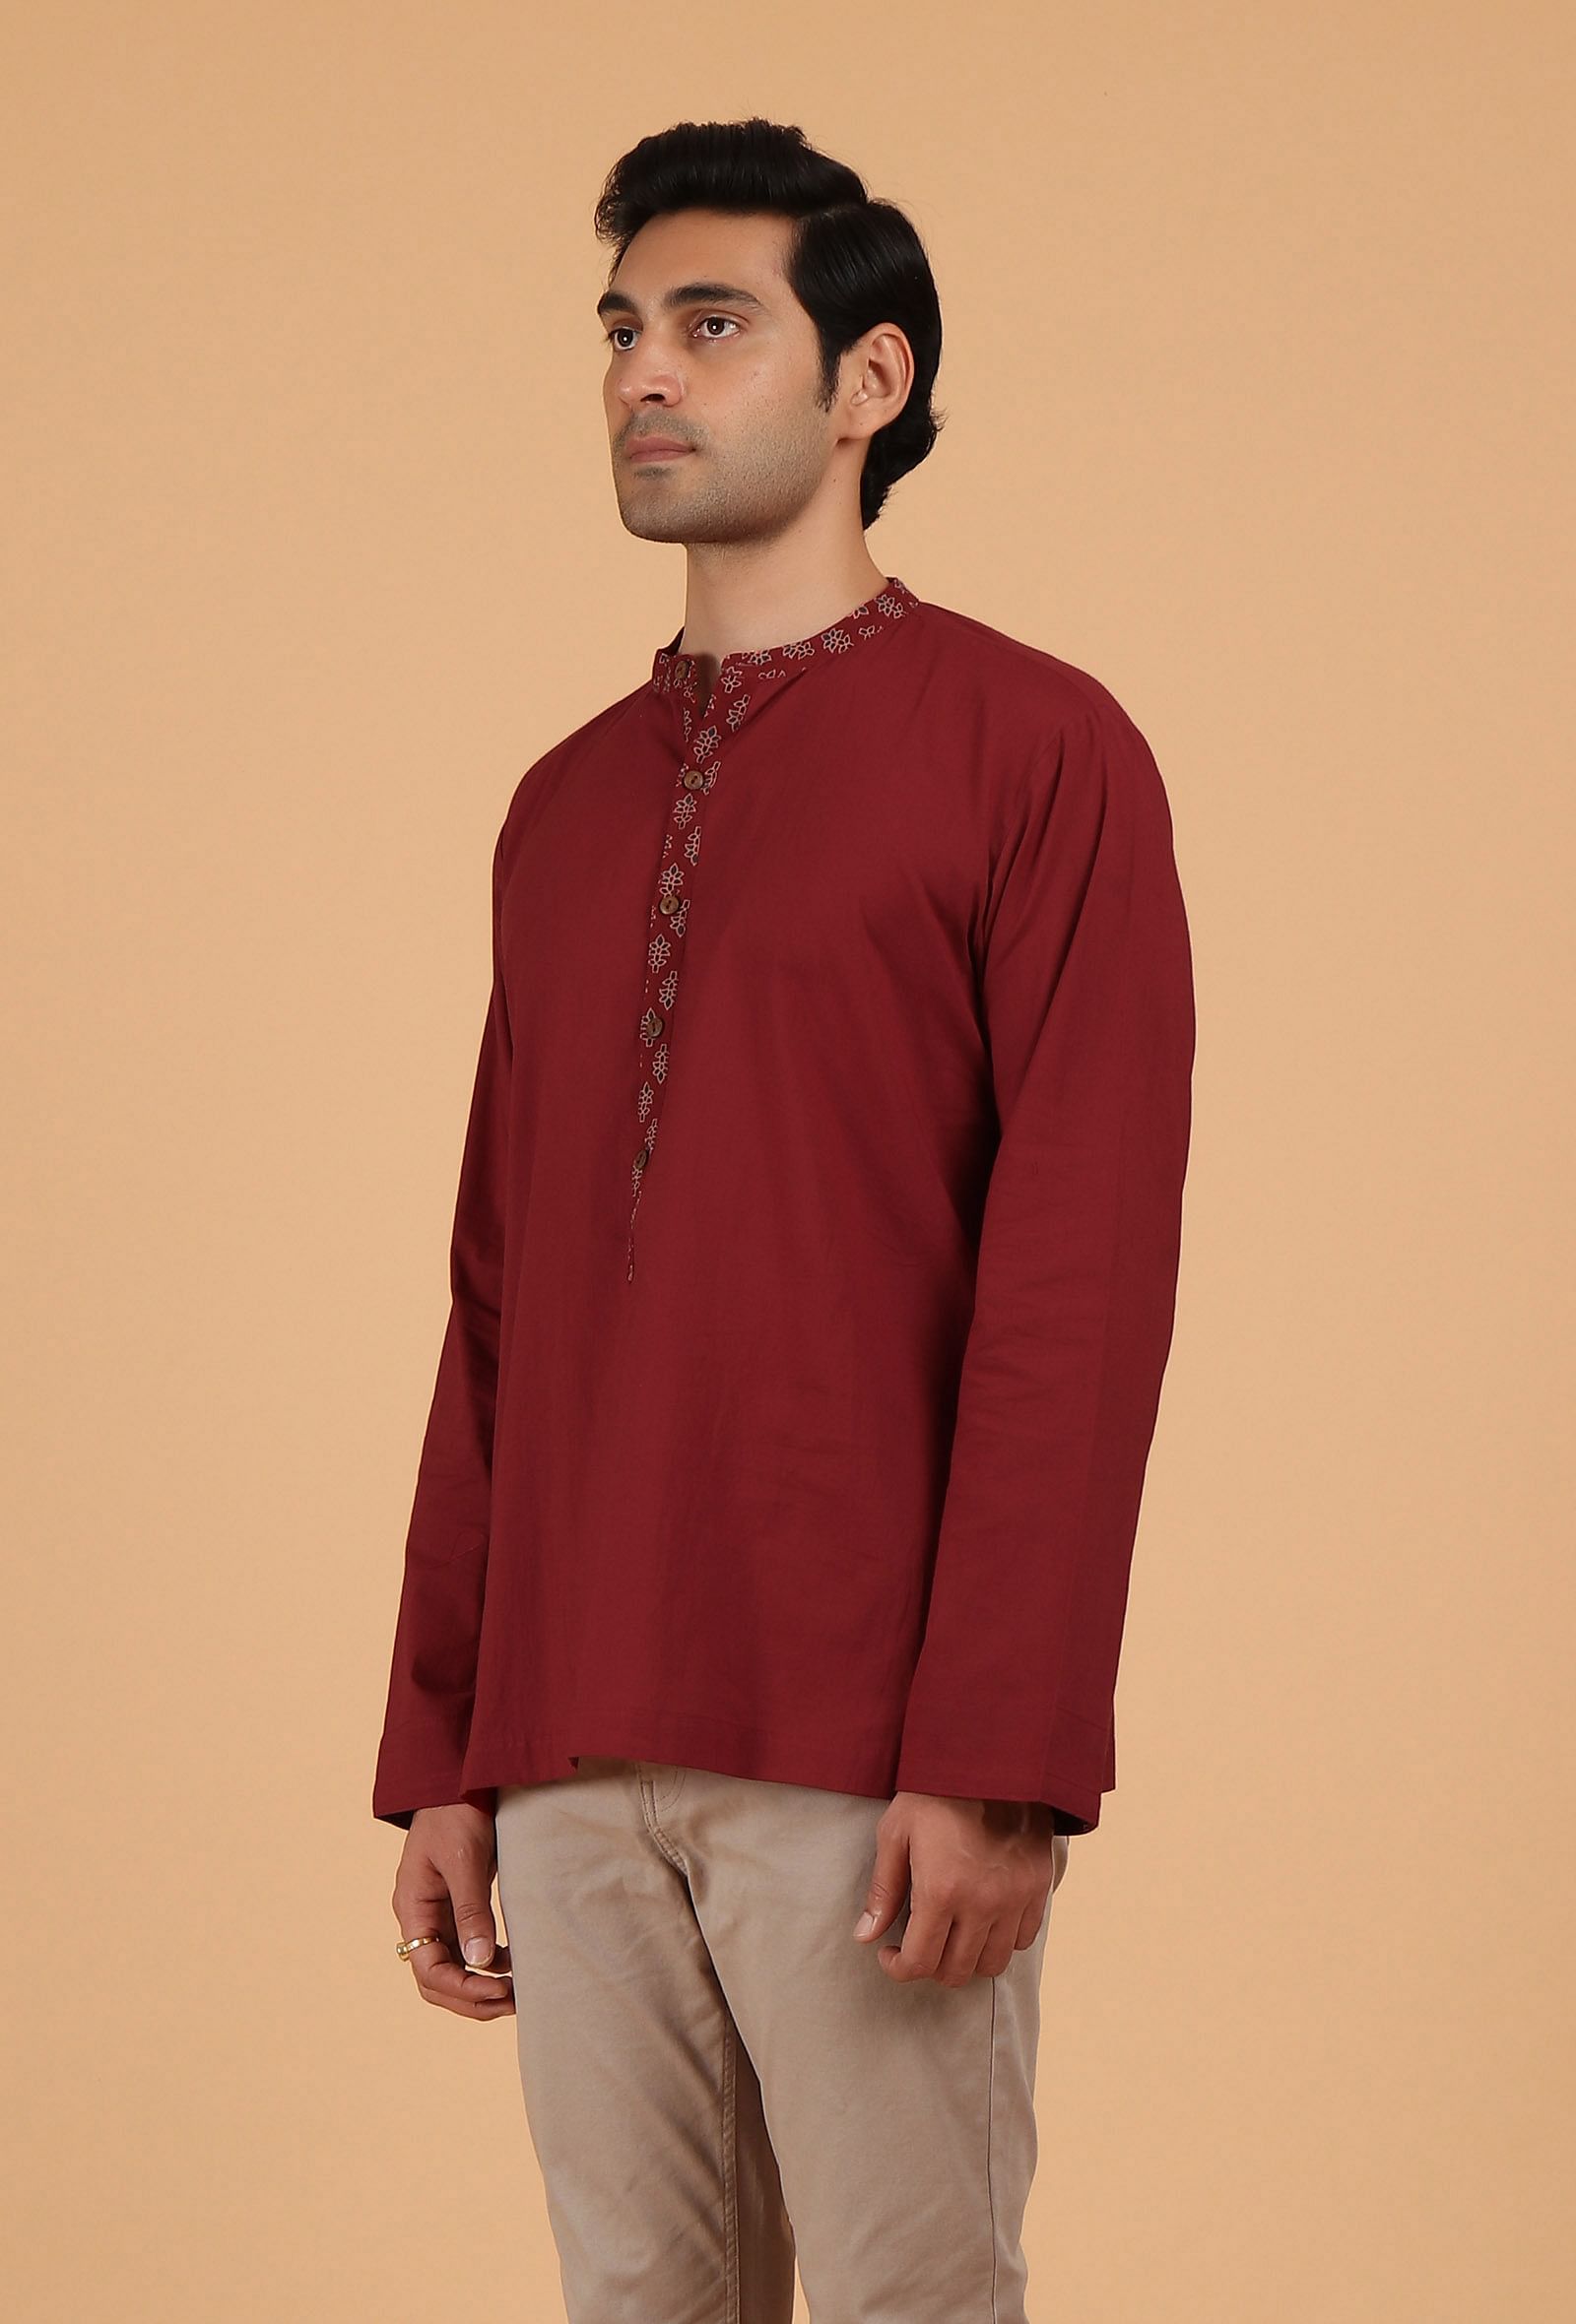 Red Ajrakh Handcrafted Cotton Full Sleeves Shirt